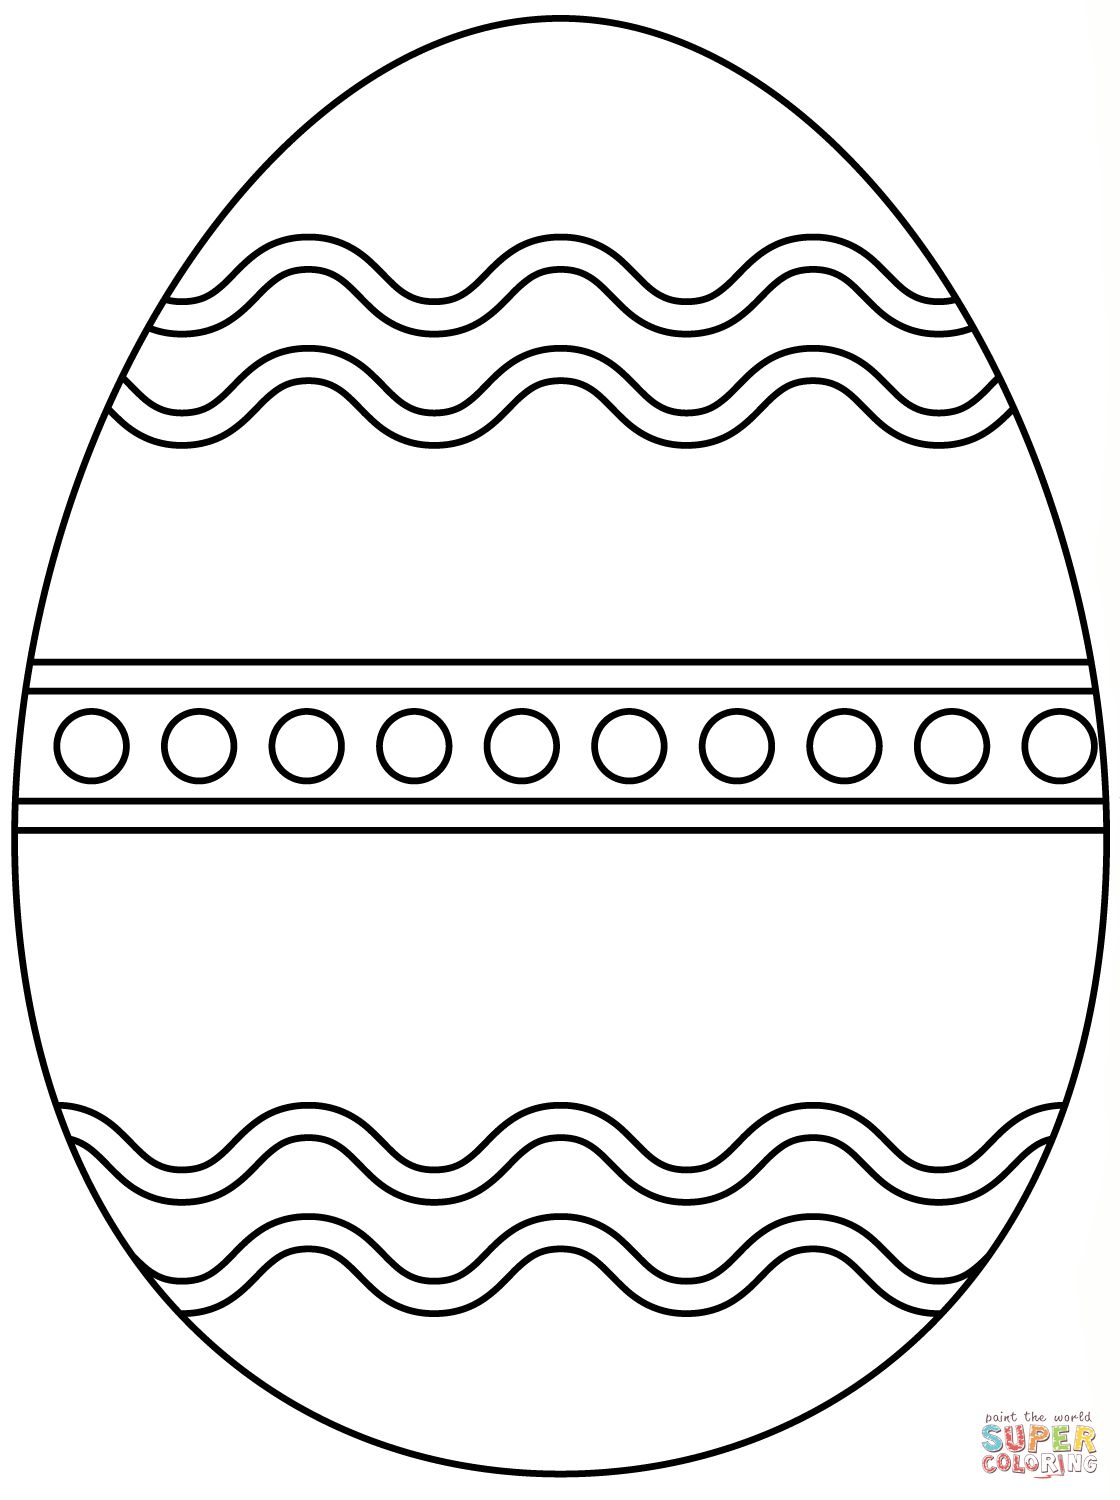 Easter Egg Colouring Pages 54